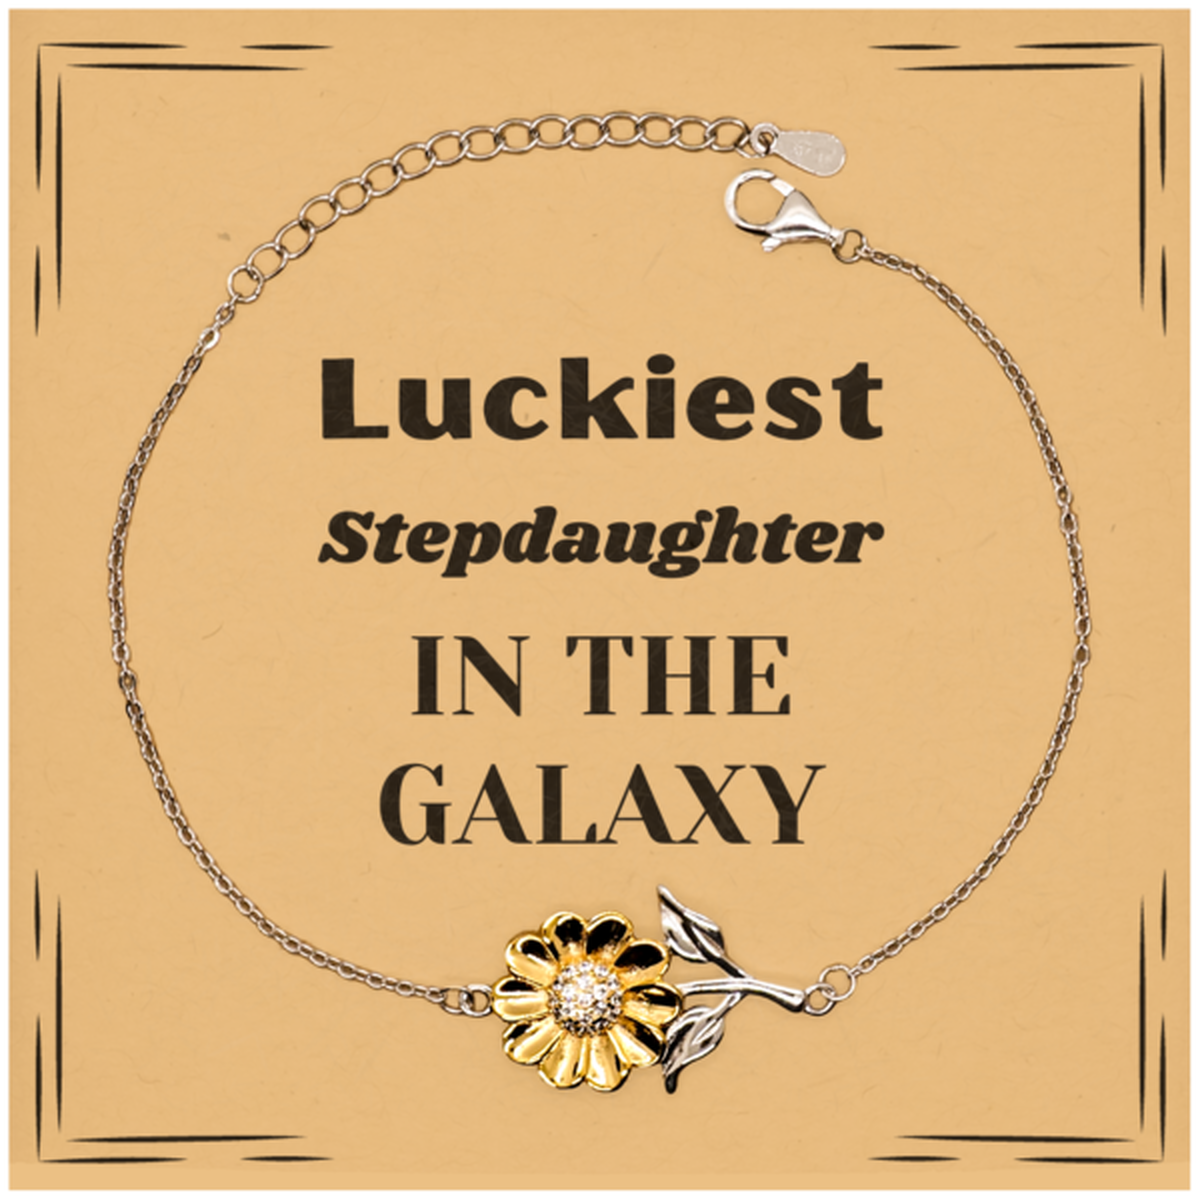 Luckiest Stepdaughter in the Galaxy, To My Stepdaughter Message Card Gifts, Christmas Stepdaughter Sunflower Bracelet Gifts, X-mas Birthday Unique Gifts For Stepdaughter Men Women